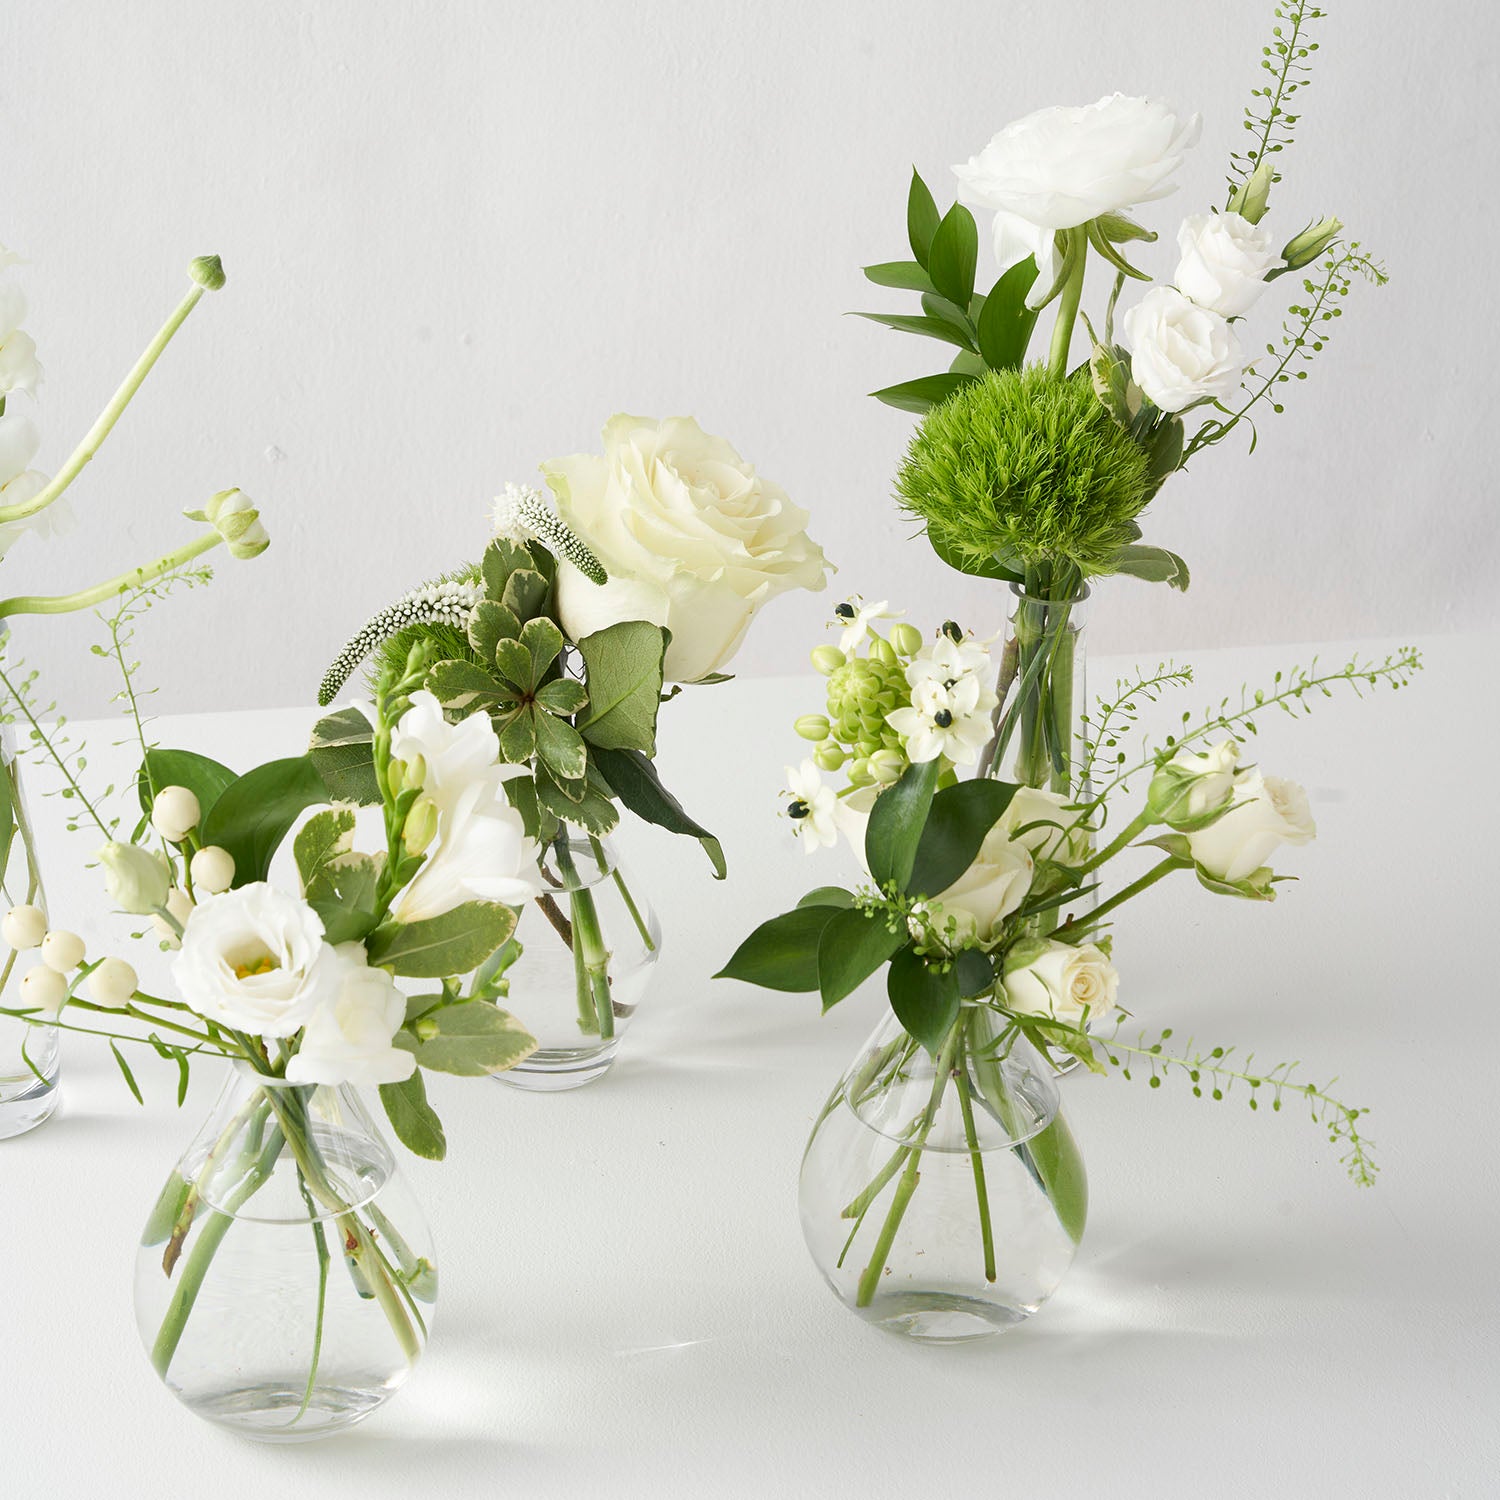 Four small clear glass vases filled with white and green flowers on white background.